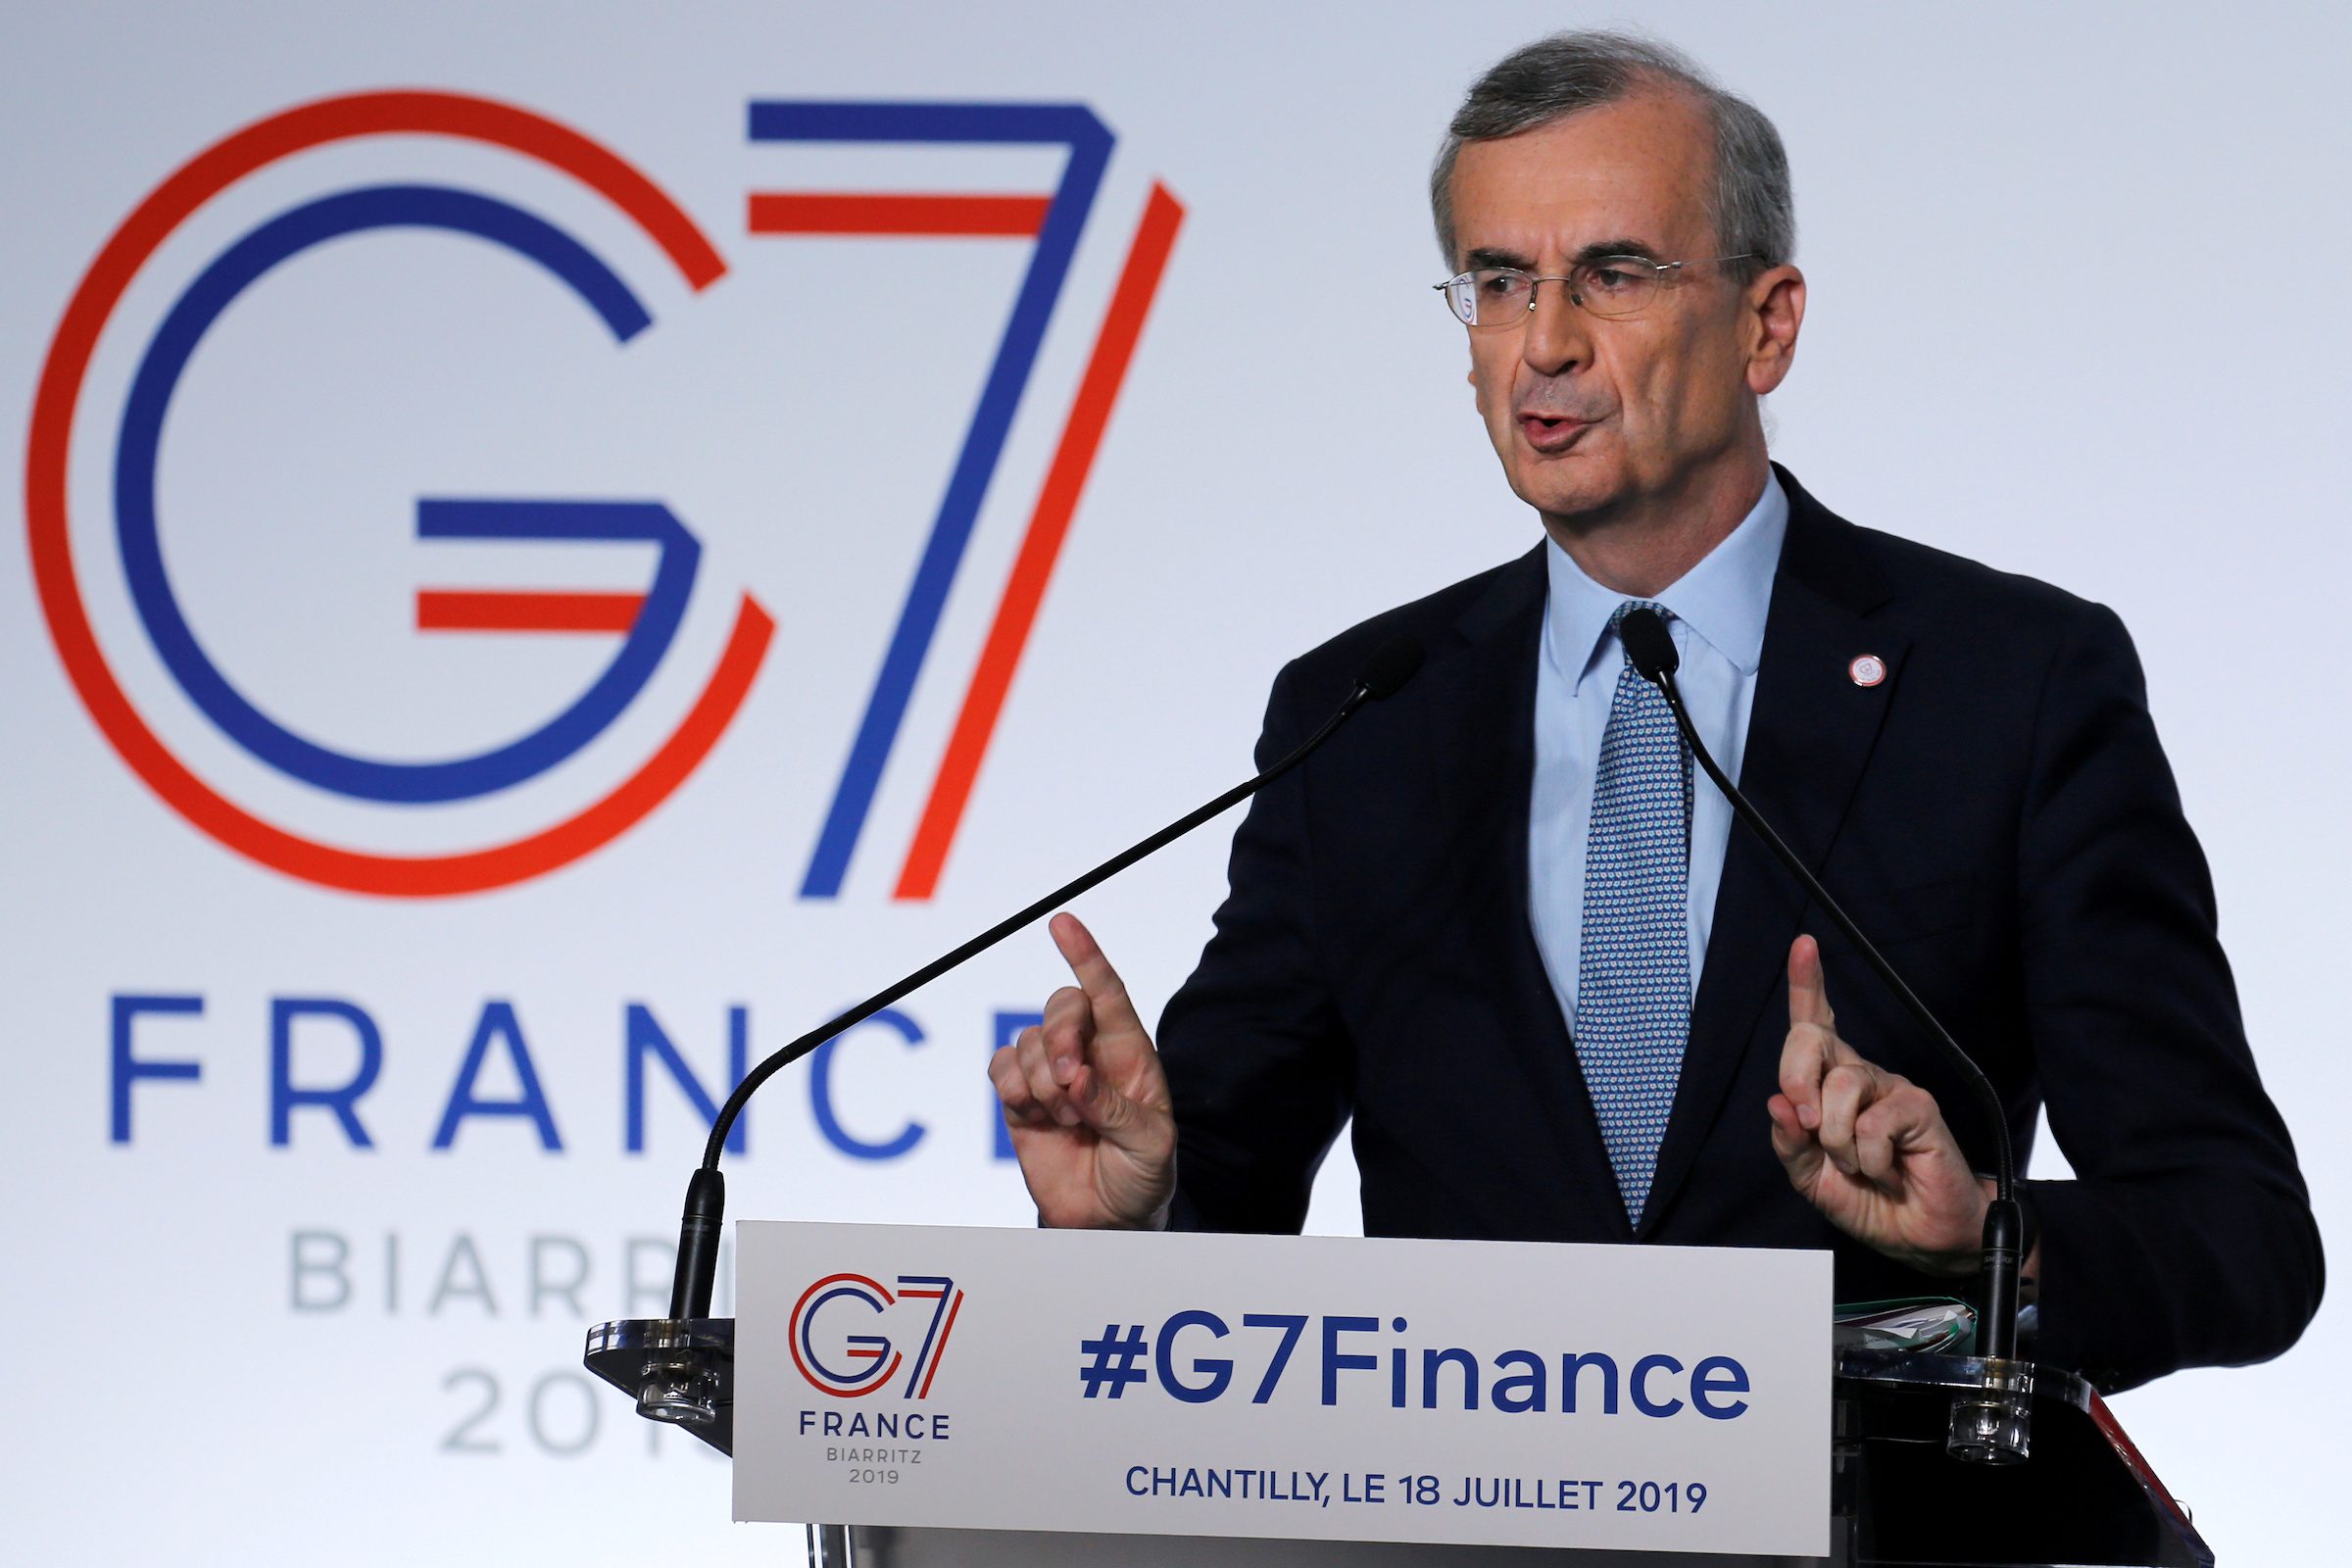 France could see losses of up to 6% on state-guaranteed COVID-19 loans